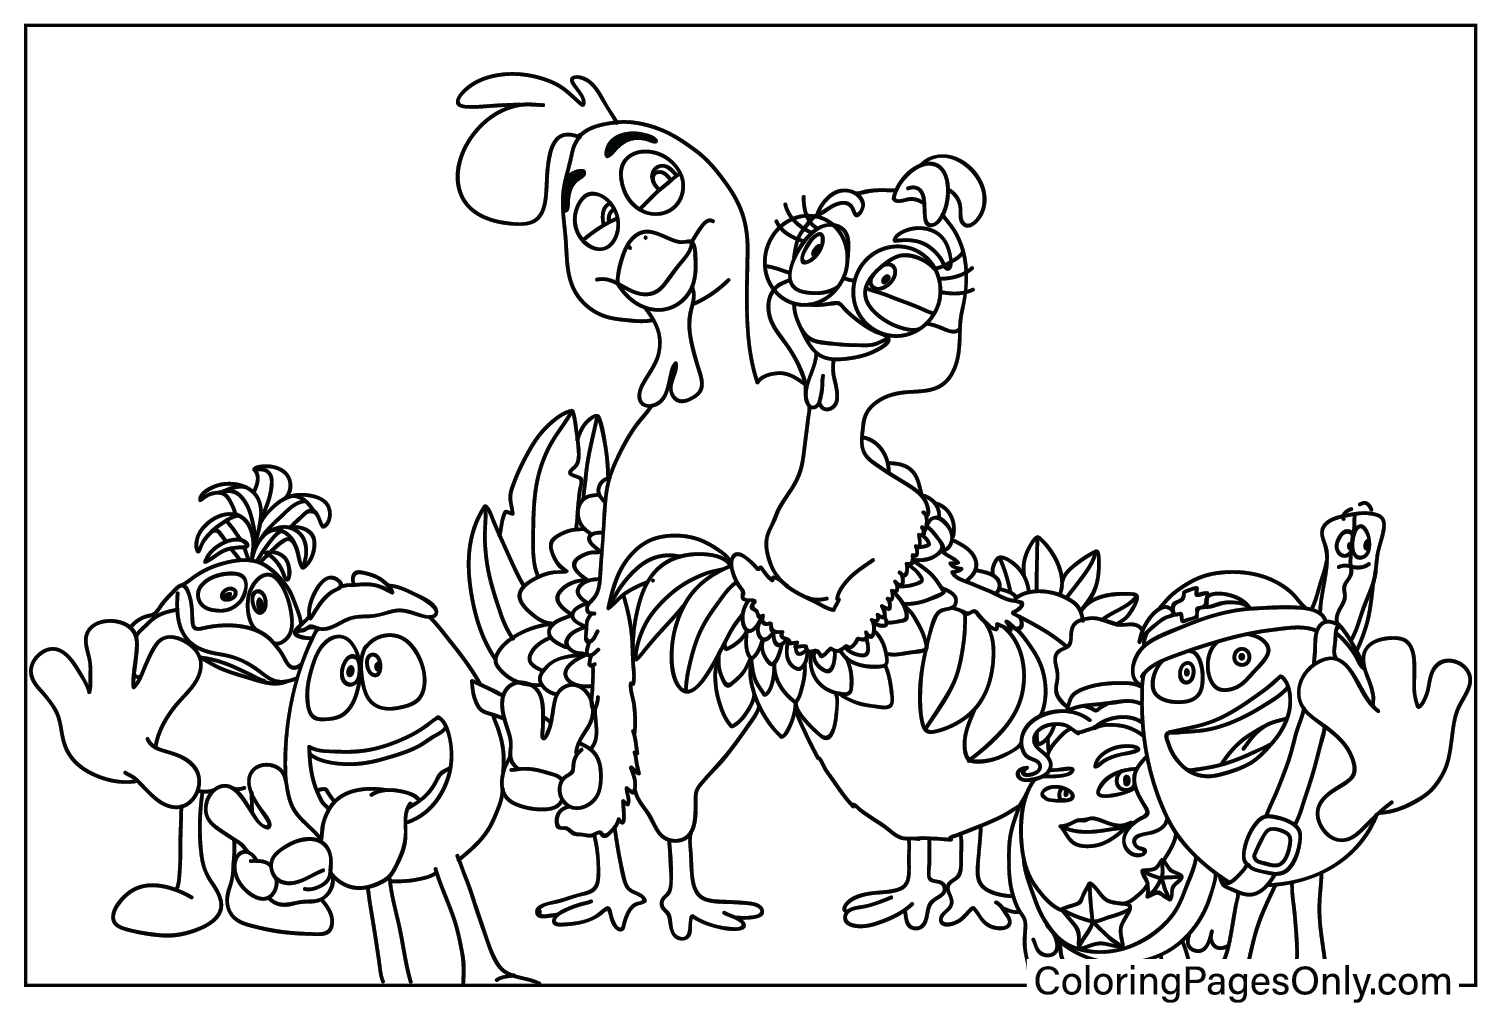 Little Eggs An African Rescue Coloring Page from Little Eggs: An African Rescue